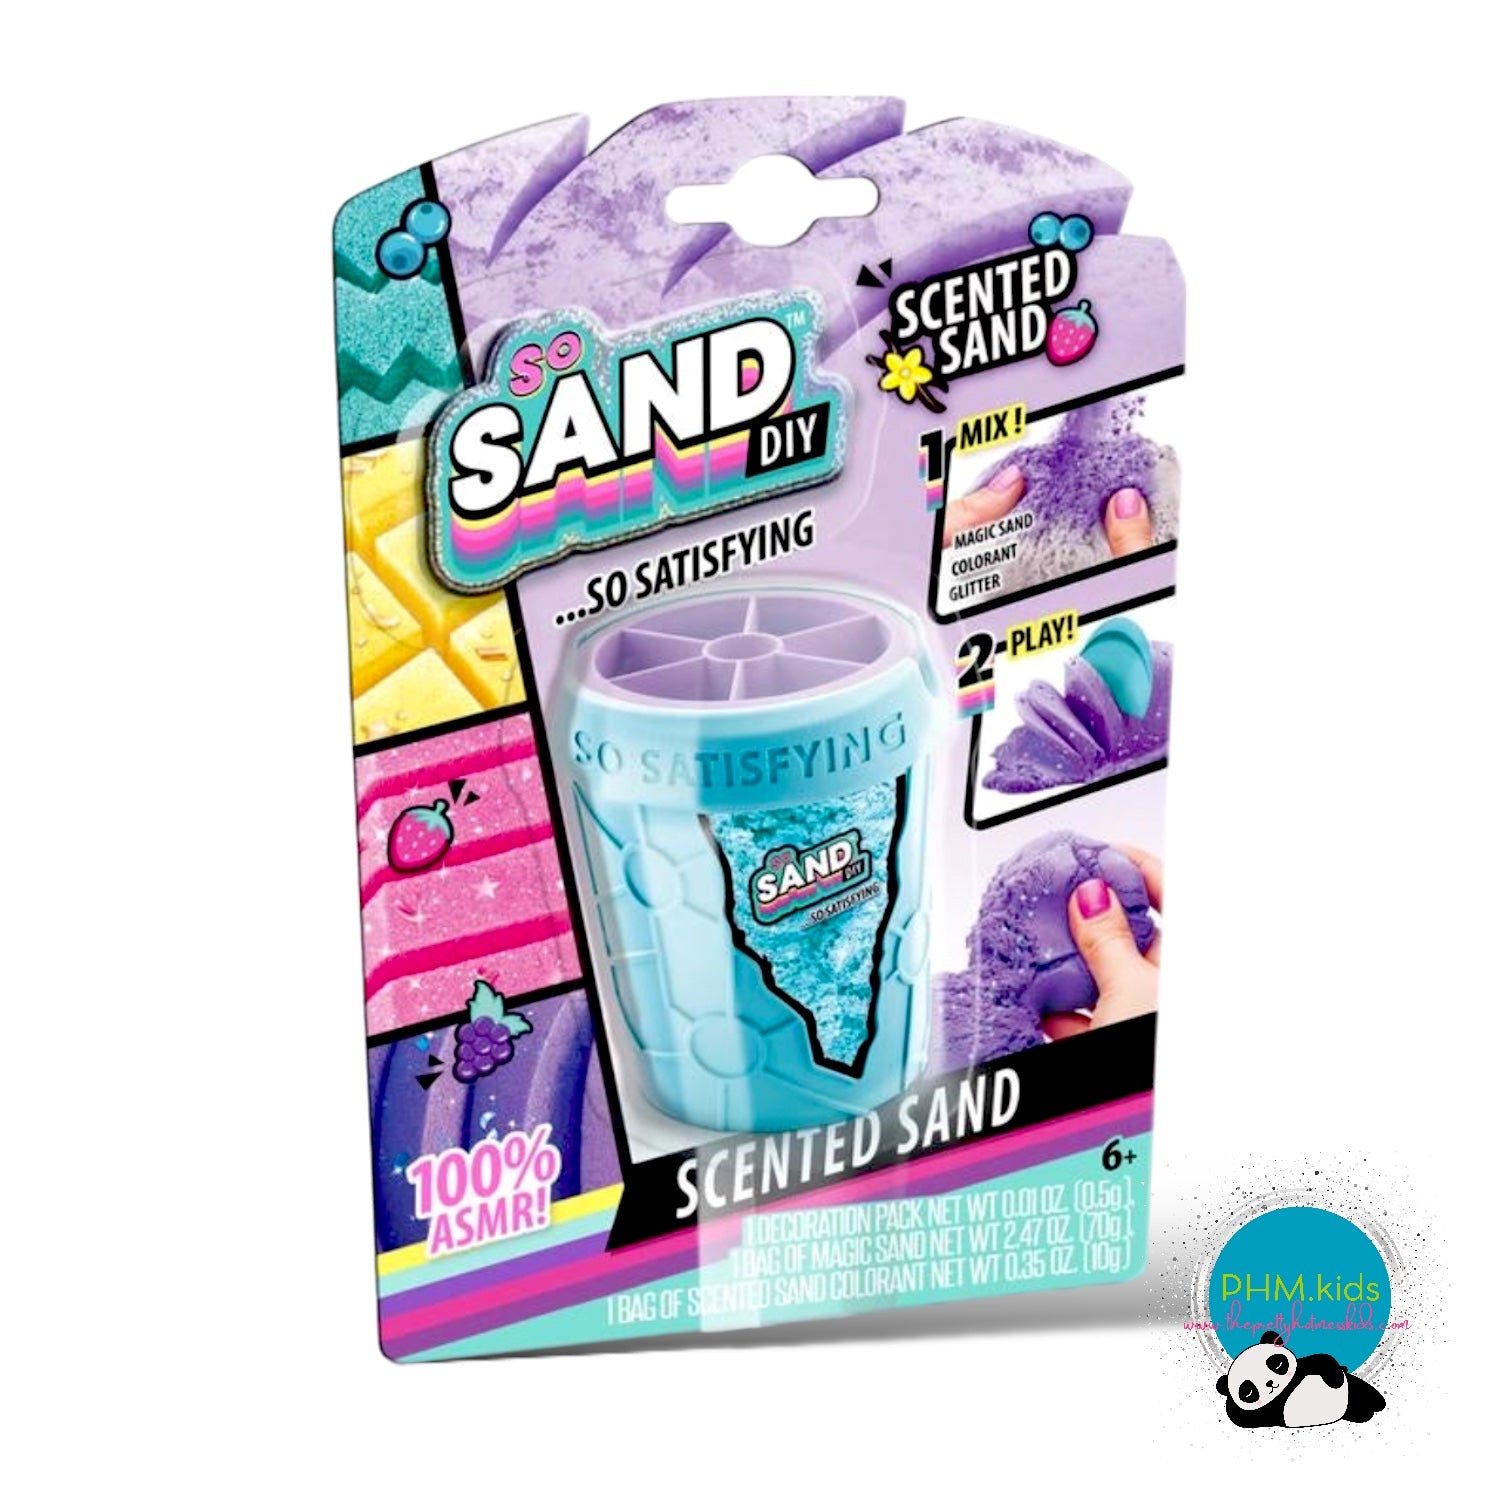 So Sand DIY Scented Sand